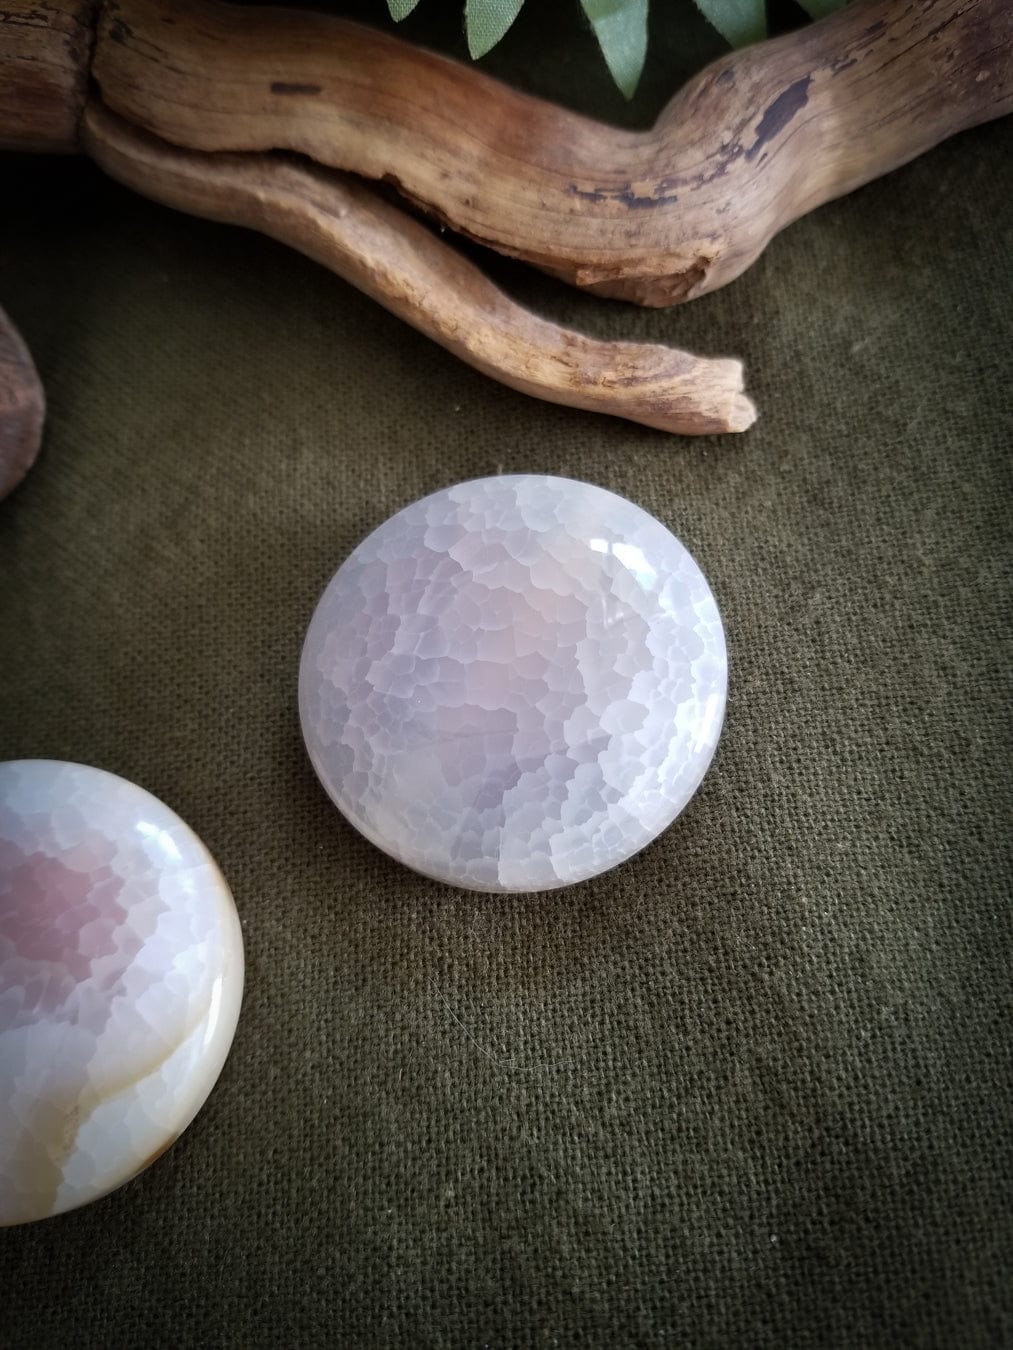 Close up. 2 Flat Round Agate beads. Color - translucent with tones of white, pink, and pale yellow. Smooth with a cracked effect created by heat.